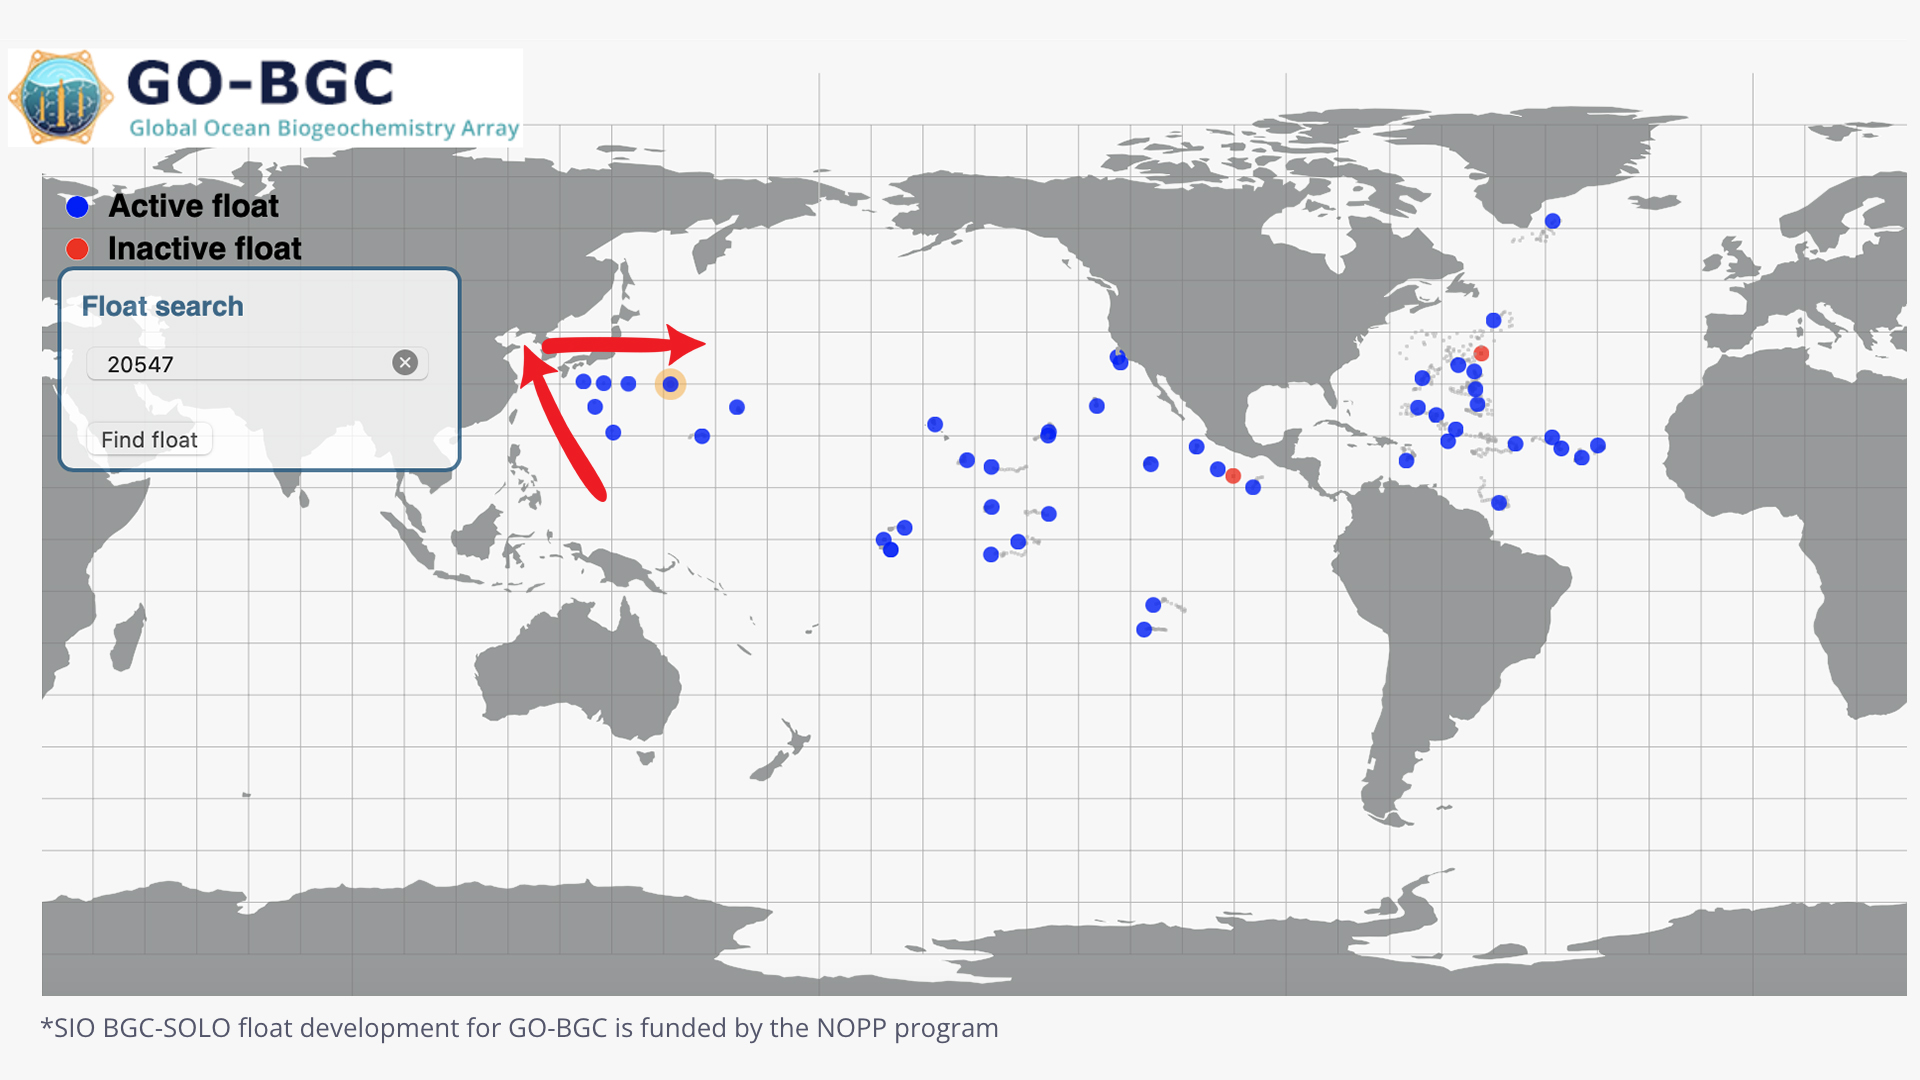 Bulldog Bait (blue dot with orange circle) is the 6th GO-BGC float we deployed in the Northern Pacific ocean